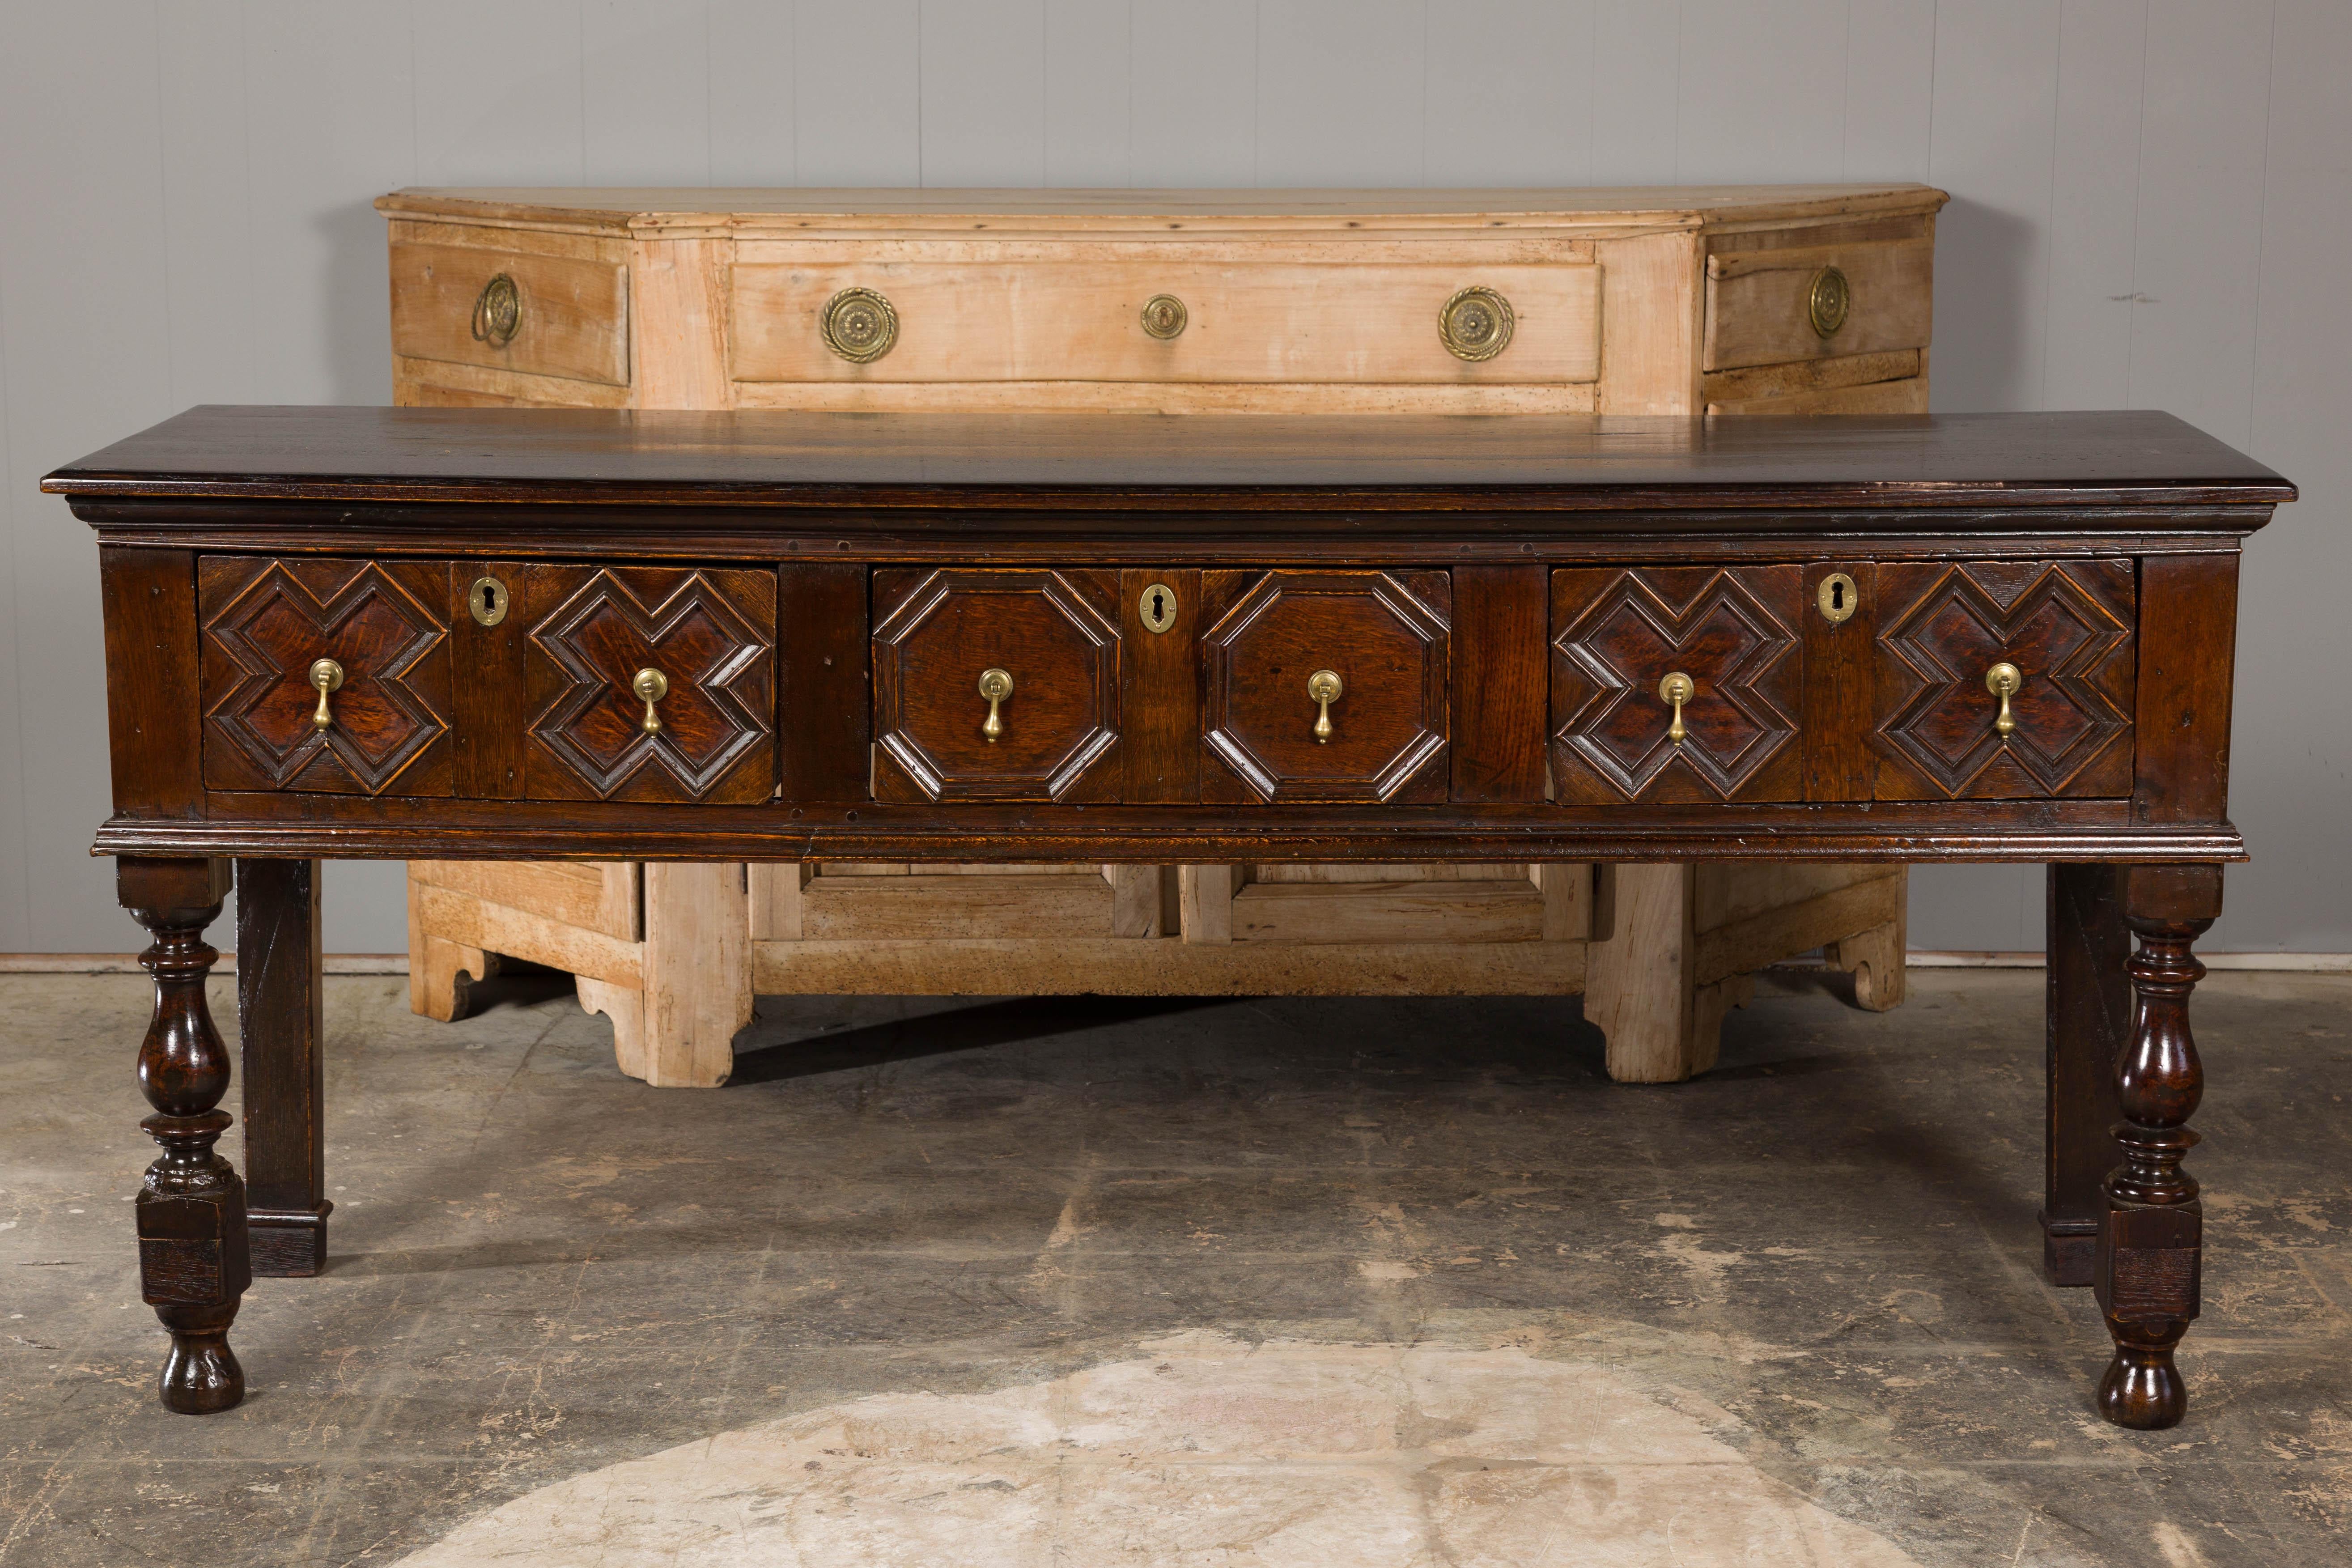 An English oak sideboard from the 19th century with geometric front and turned baluster legs. Enthrall your living space with the charm and regal allure of this 19th-century English oak sideboard, an emblem of craftsmanship and tradition. Cradled by